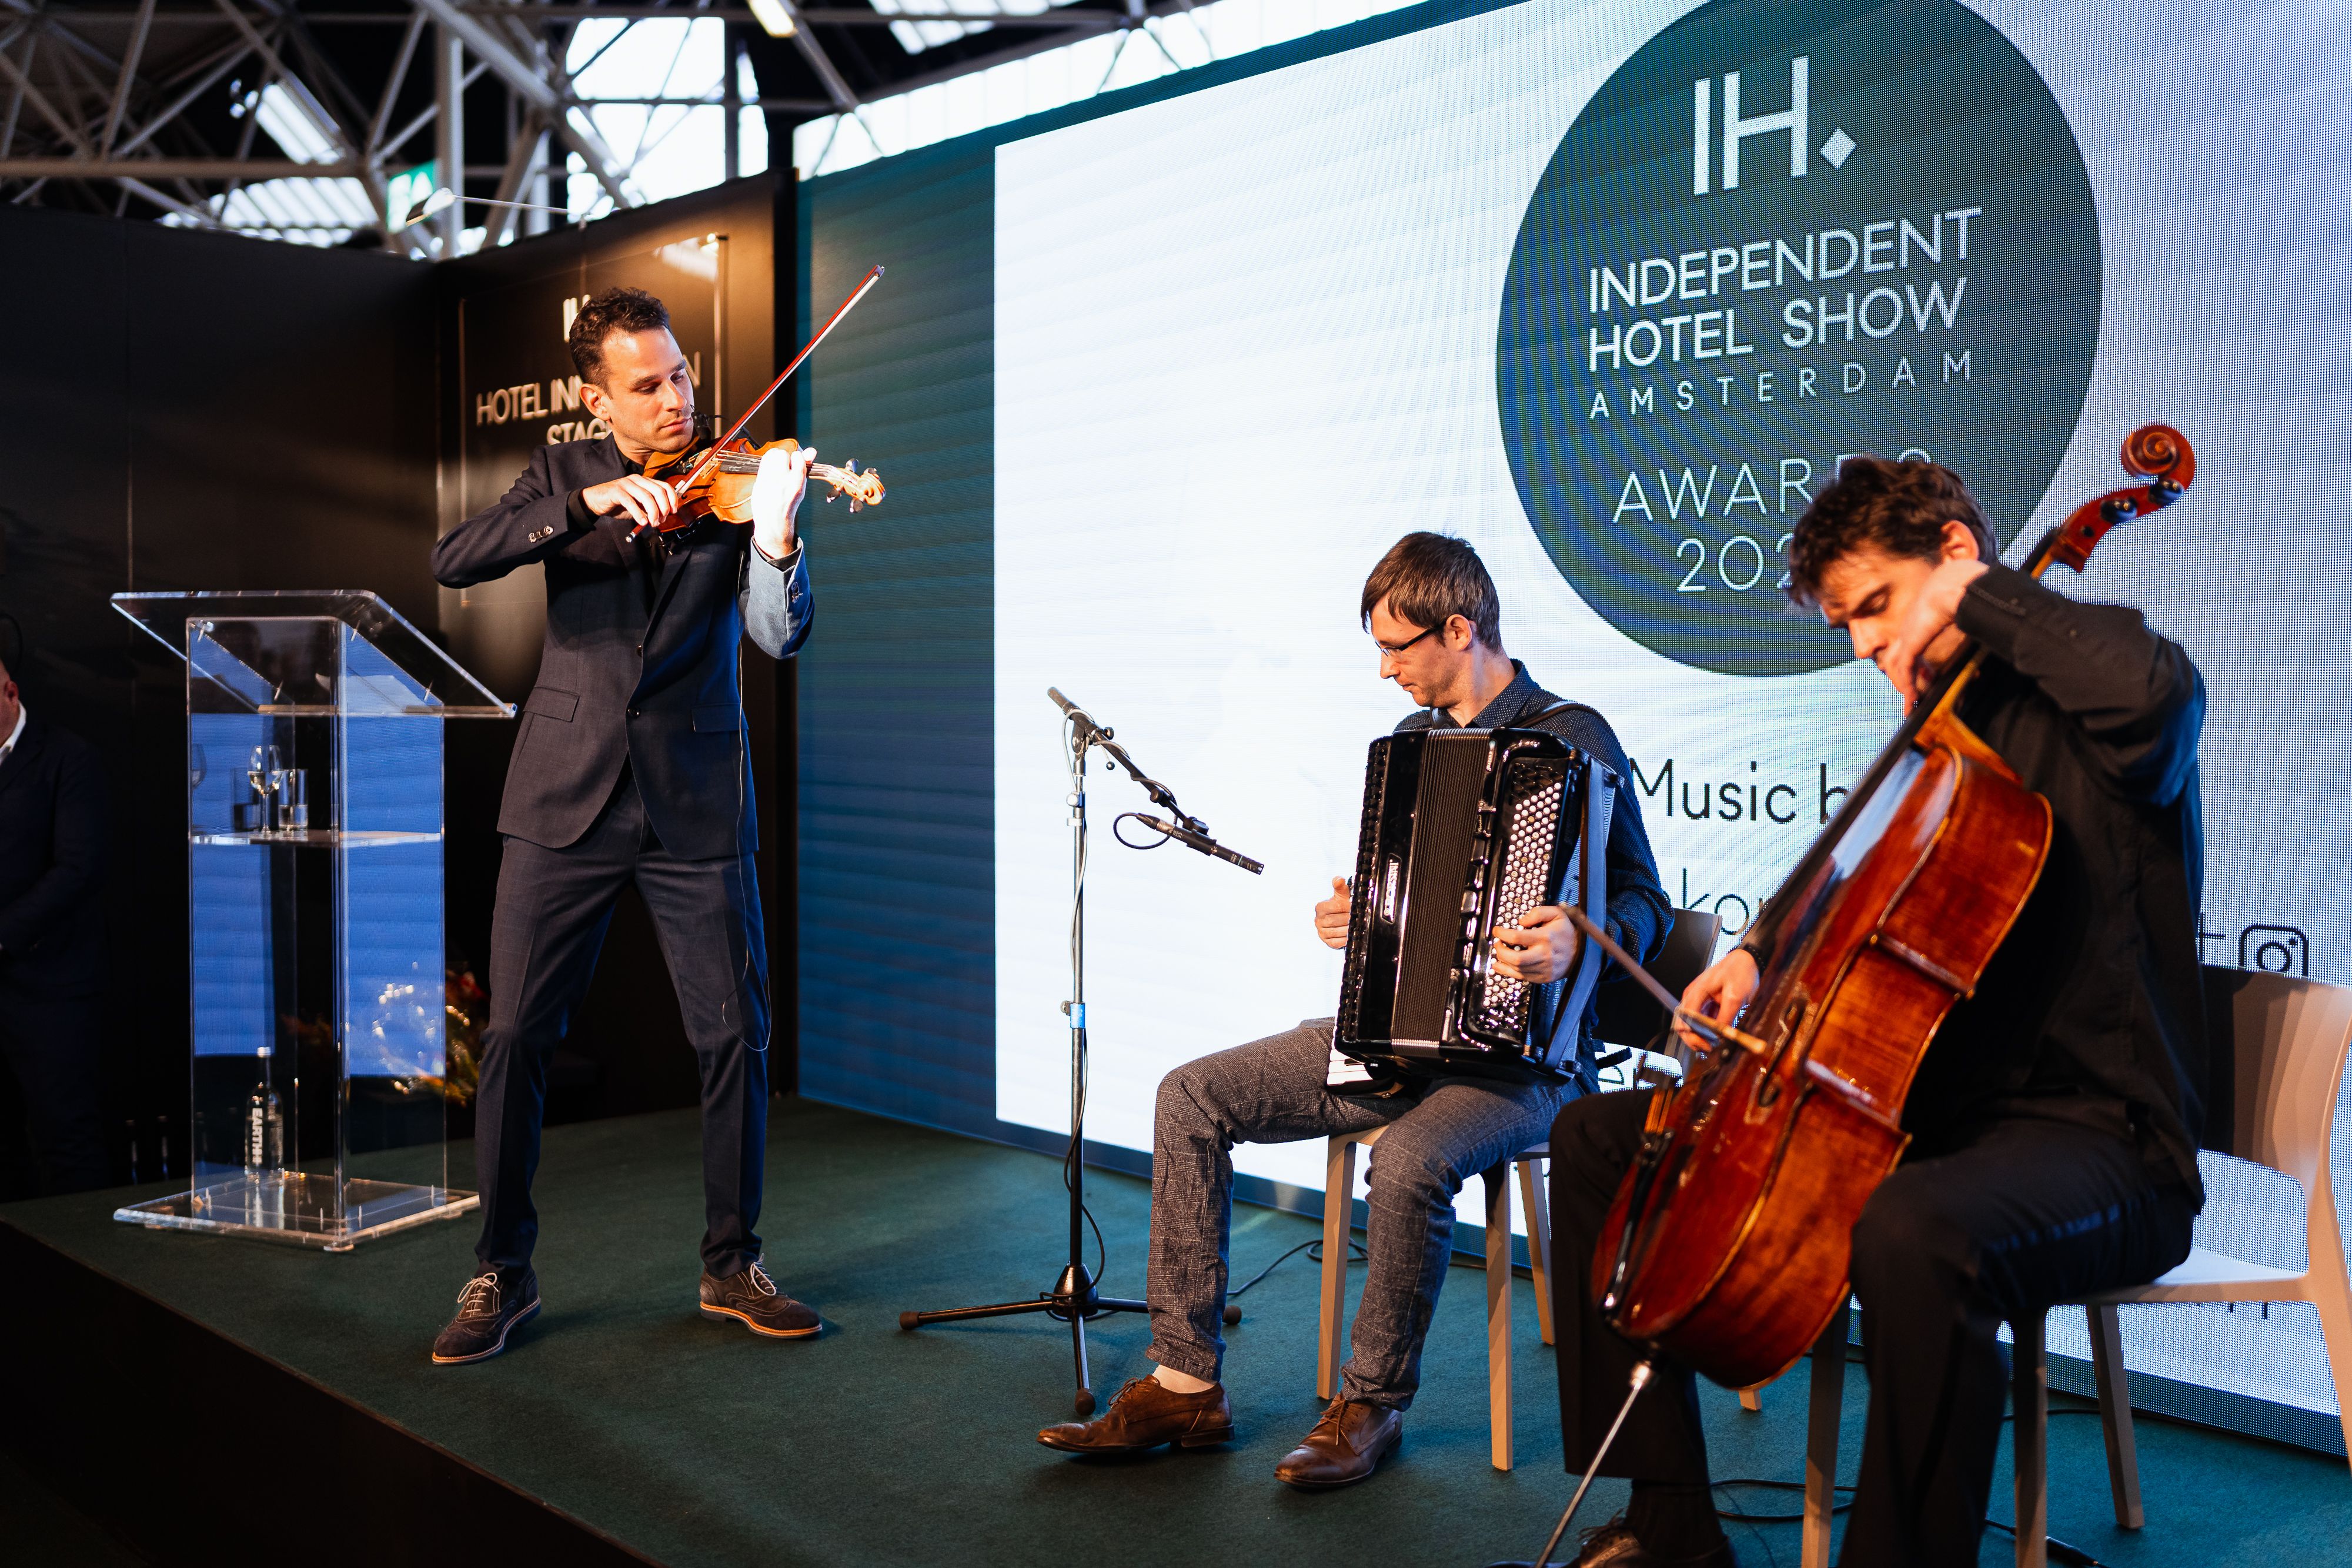 INDEPENDENT HOTEL SHOW AWARDS